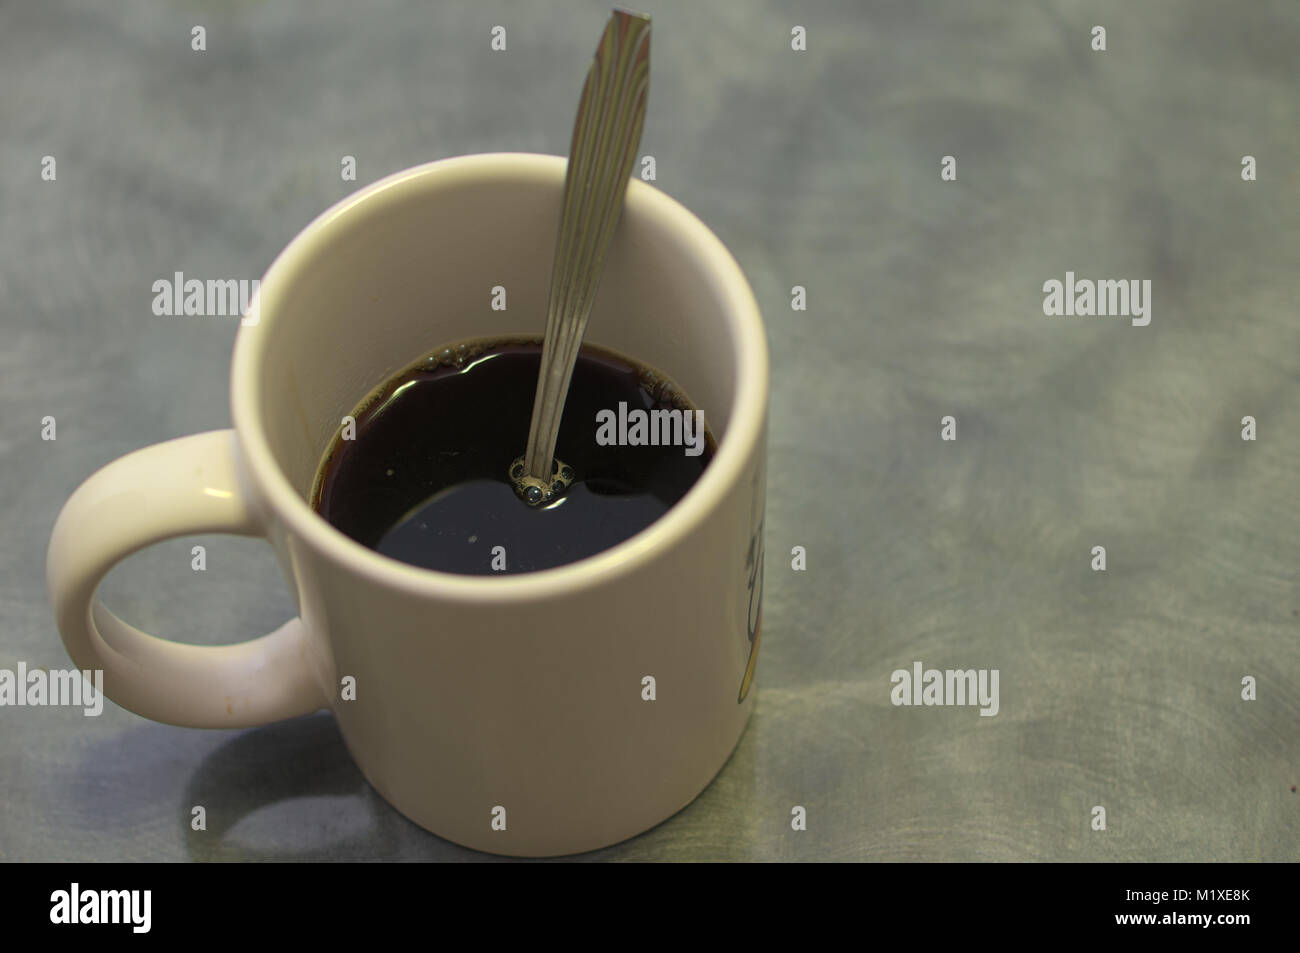 Ice coffee in glass mug with milk and cinnamon on wooden table in the  garden Stock Photo - Alamy